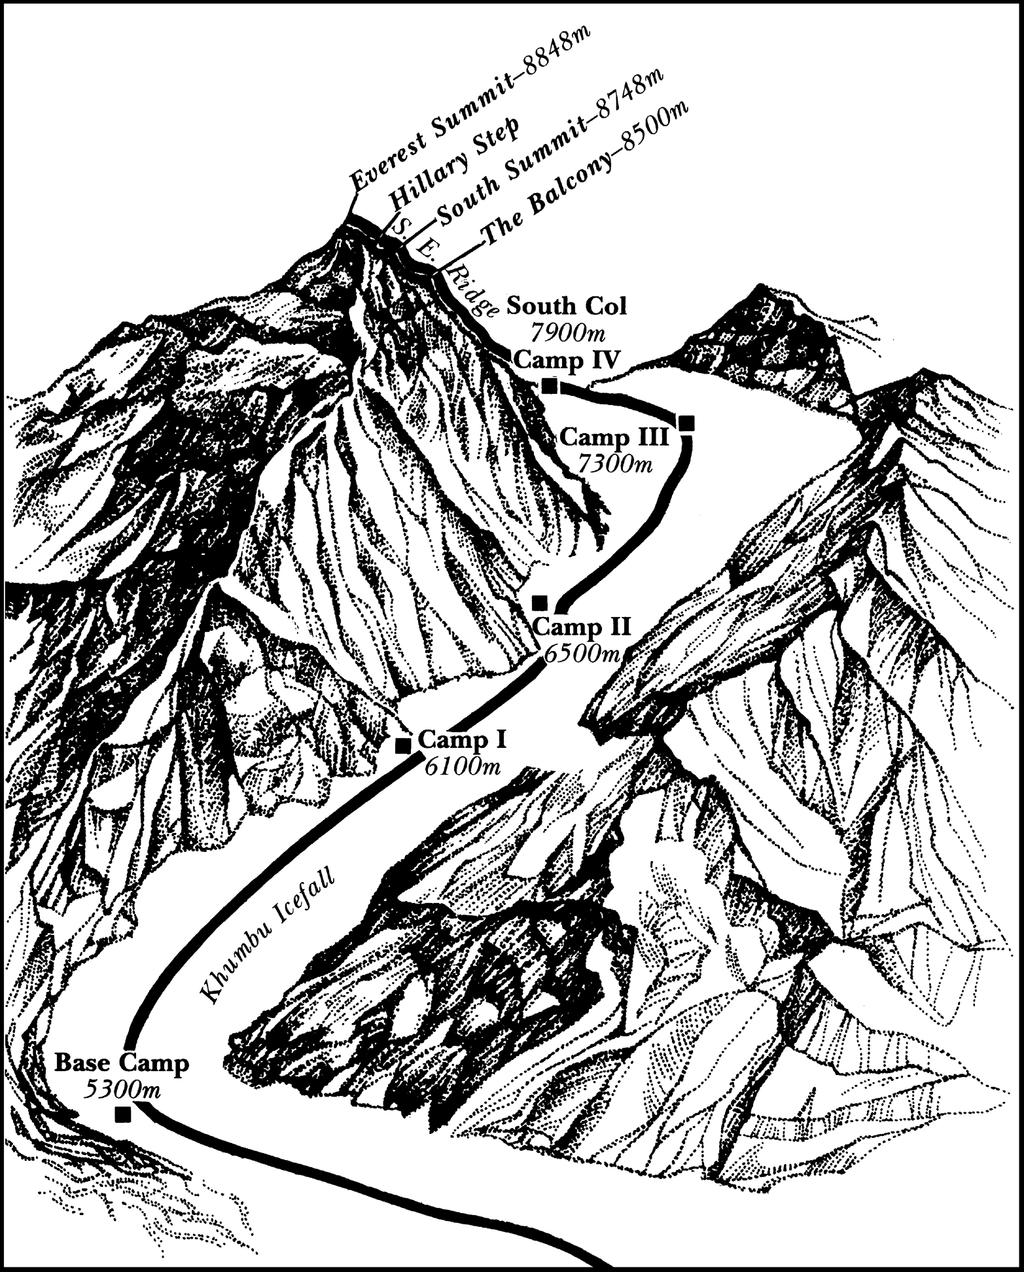 303-061 Mount Everest 1996 Exhibit 4 Mount Everest Map South Col Route Source: Adapted from Anatoli